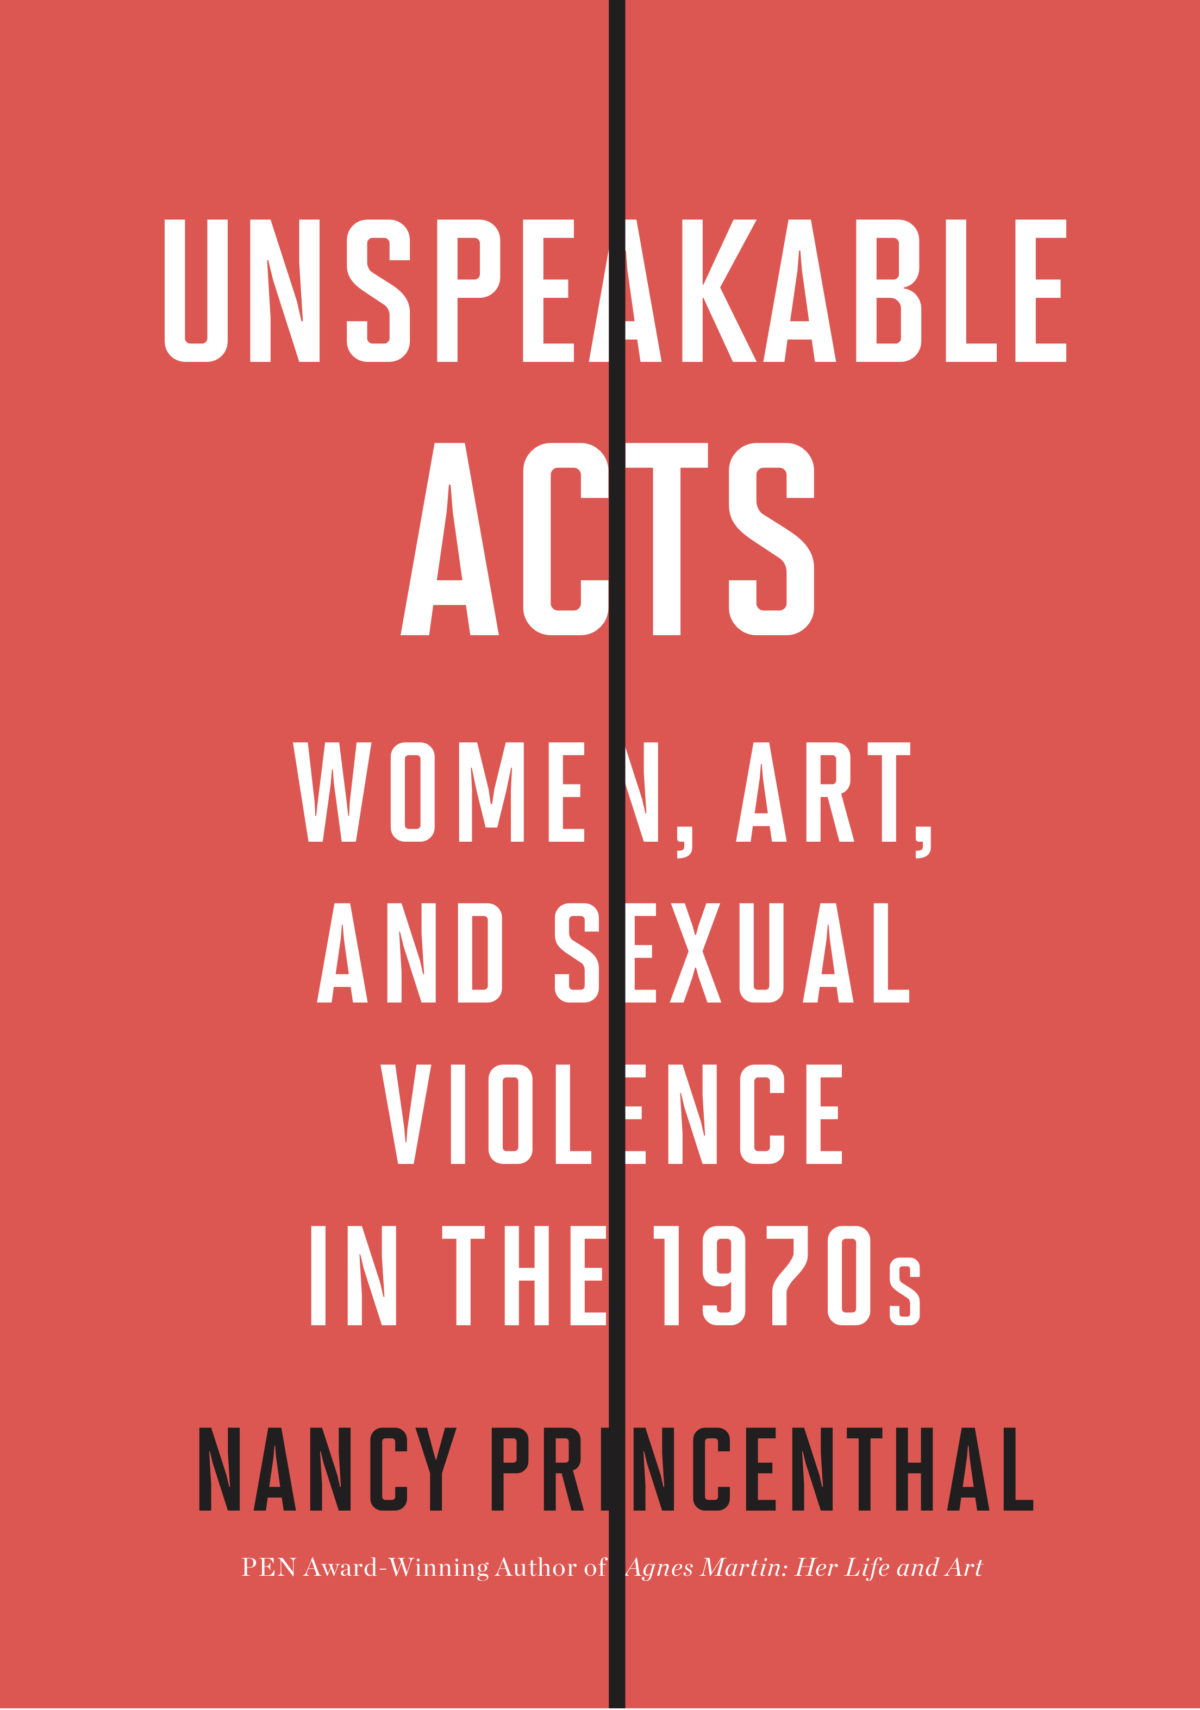 The cover of Nancy Princenthal's 'Unspeakable Acts: Women, Art, and Sexual Violence in the 1970s.'